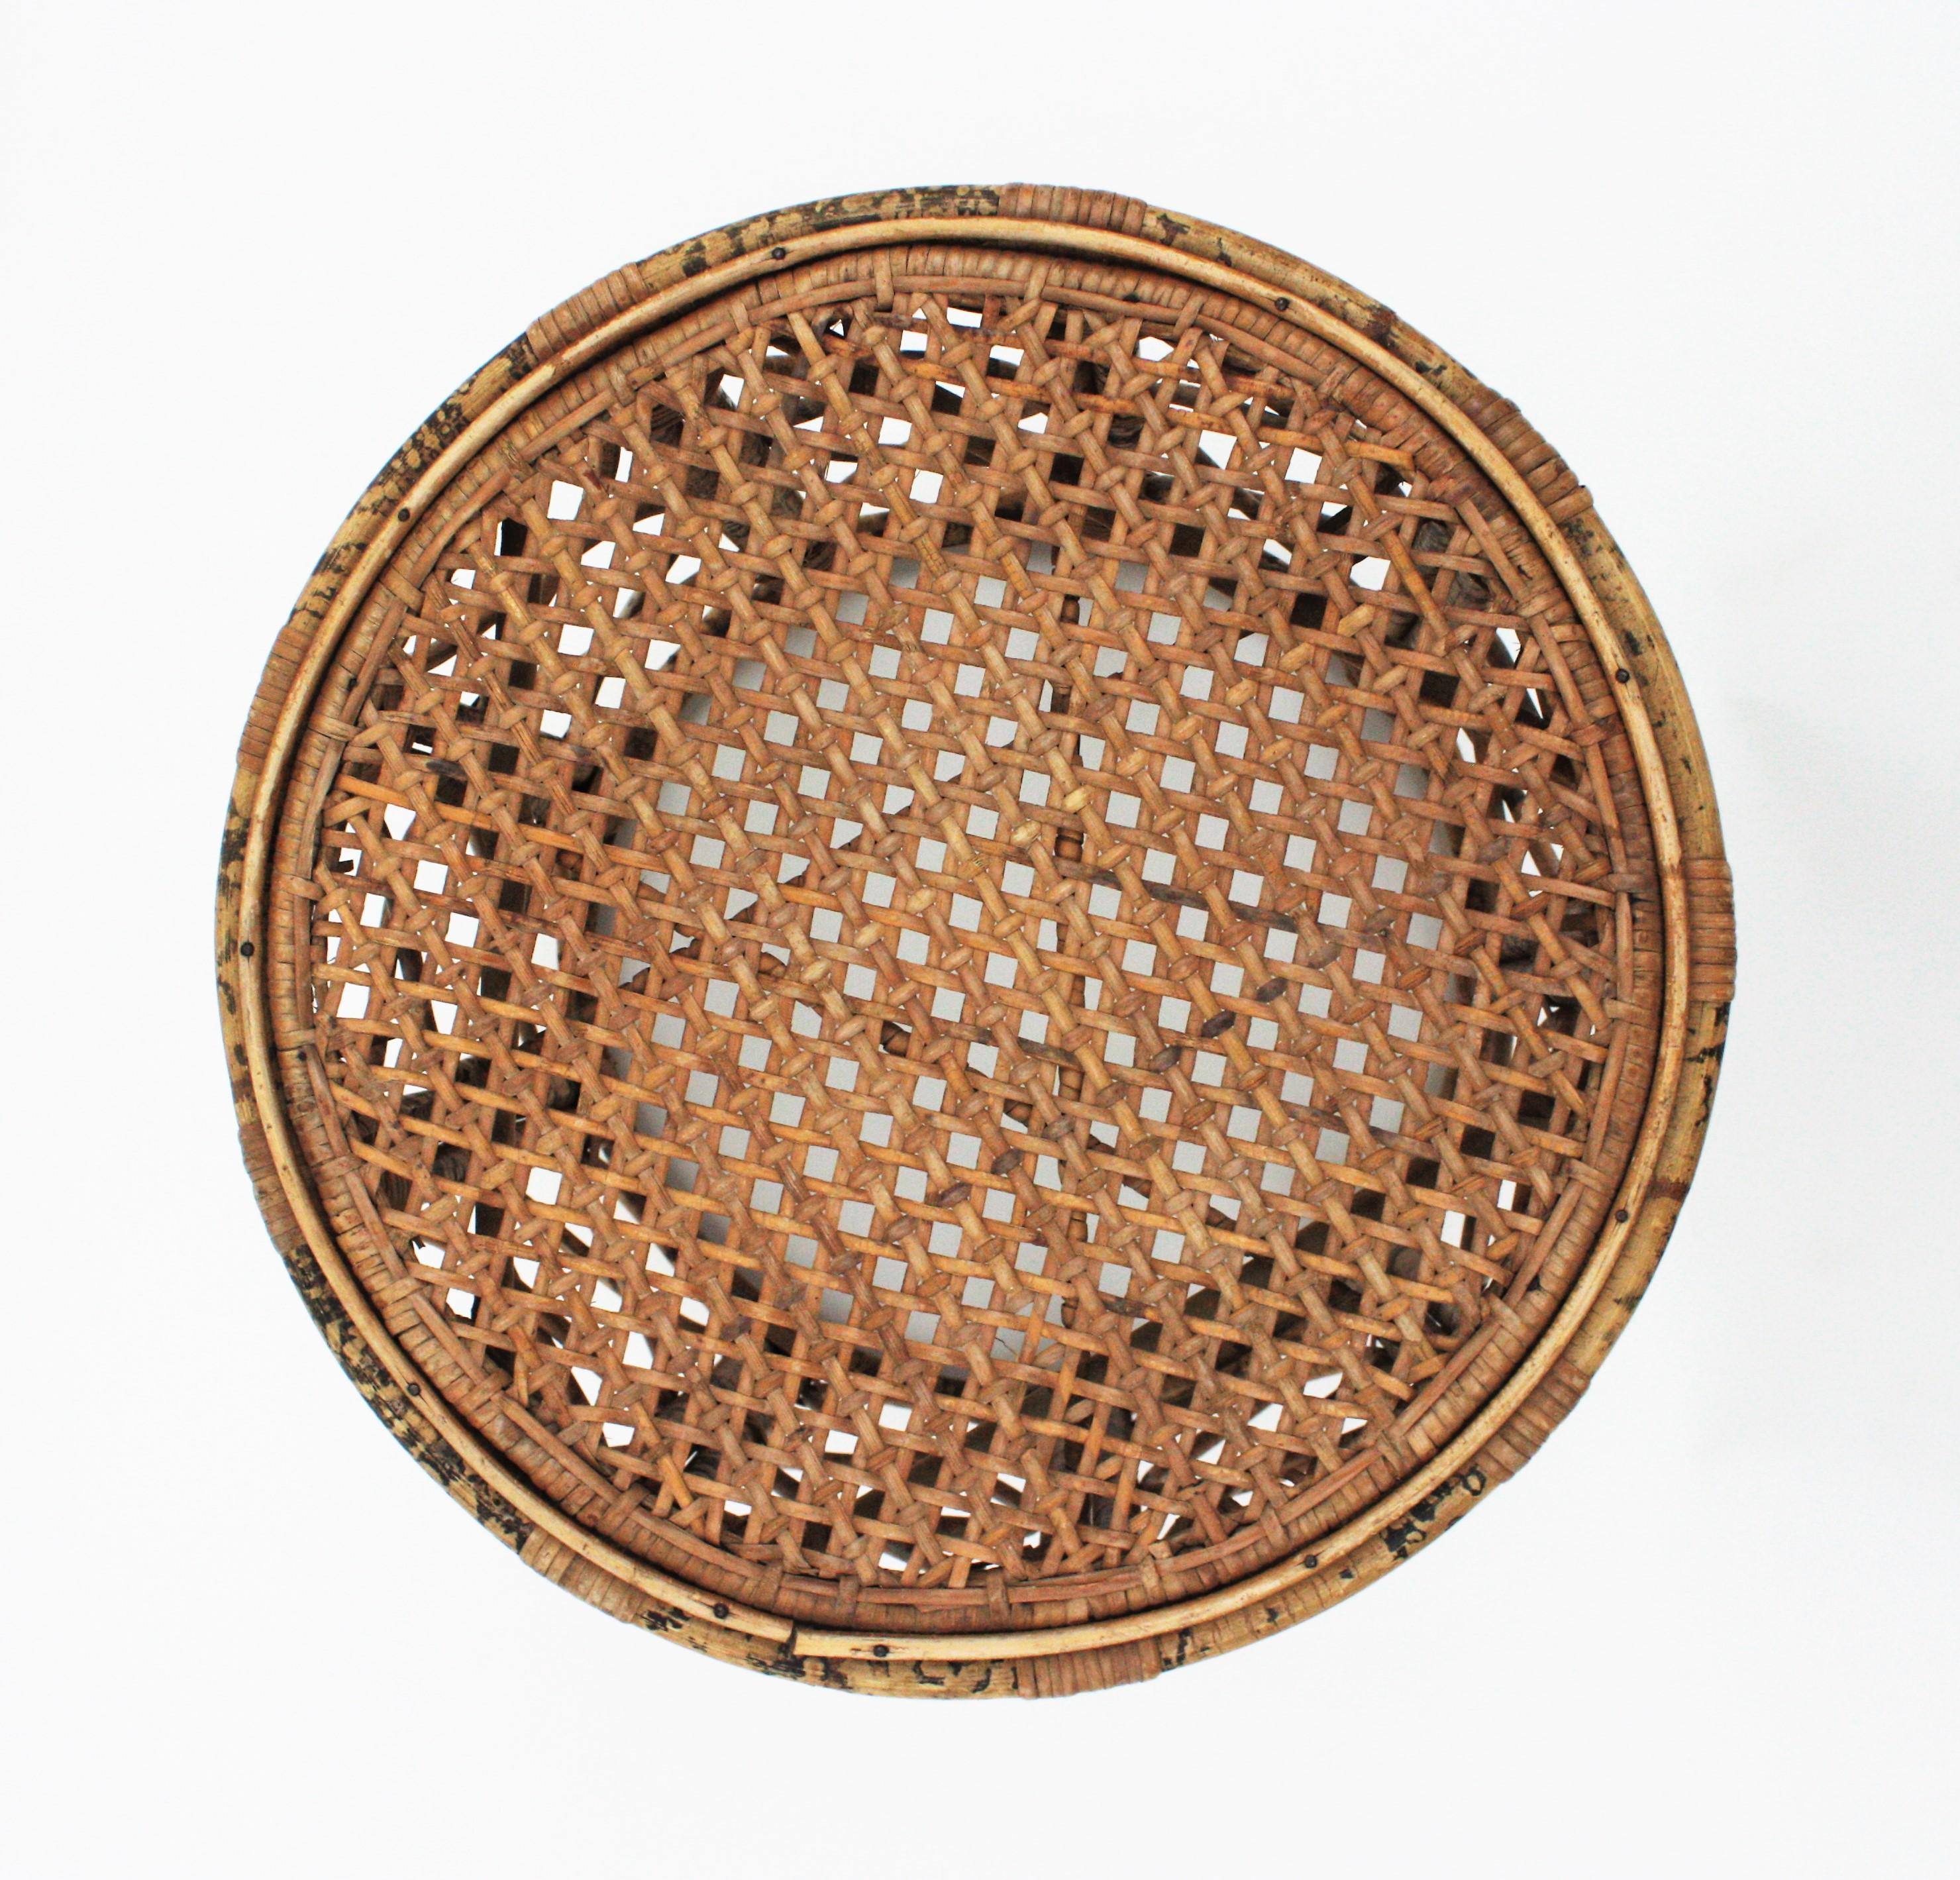 20th Century French Side Table or Stool in Tiger Bamboo Rattan with Woven Wicker Top, 1940s For Sale